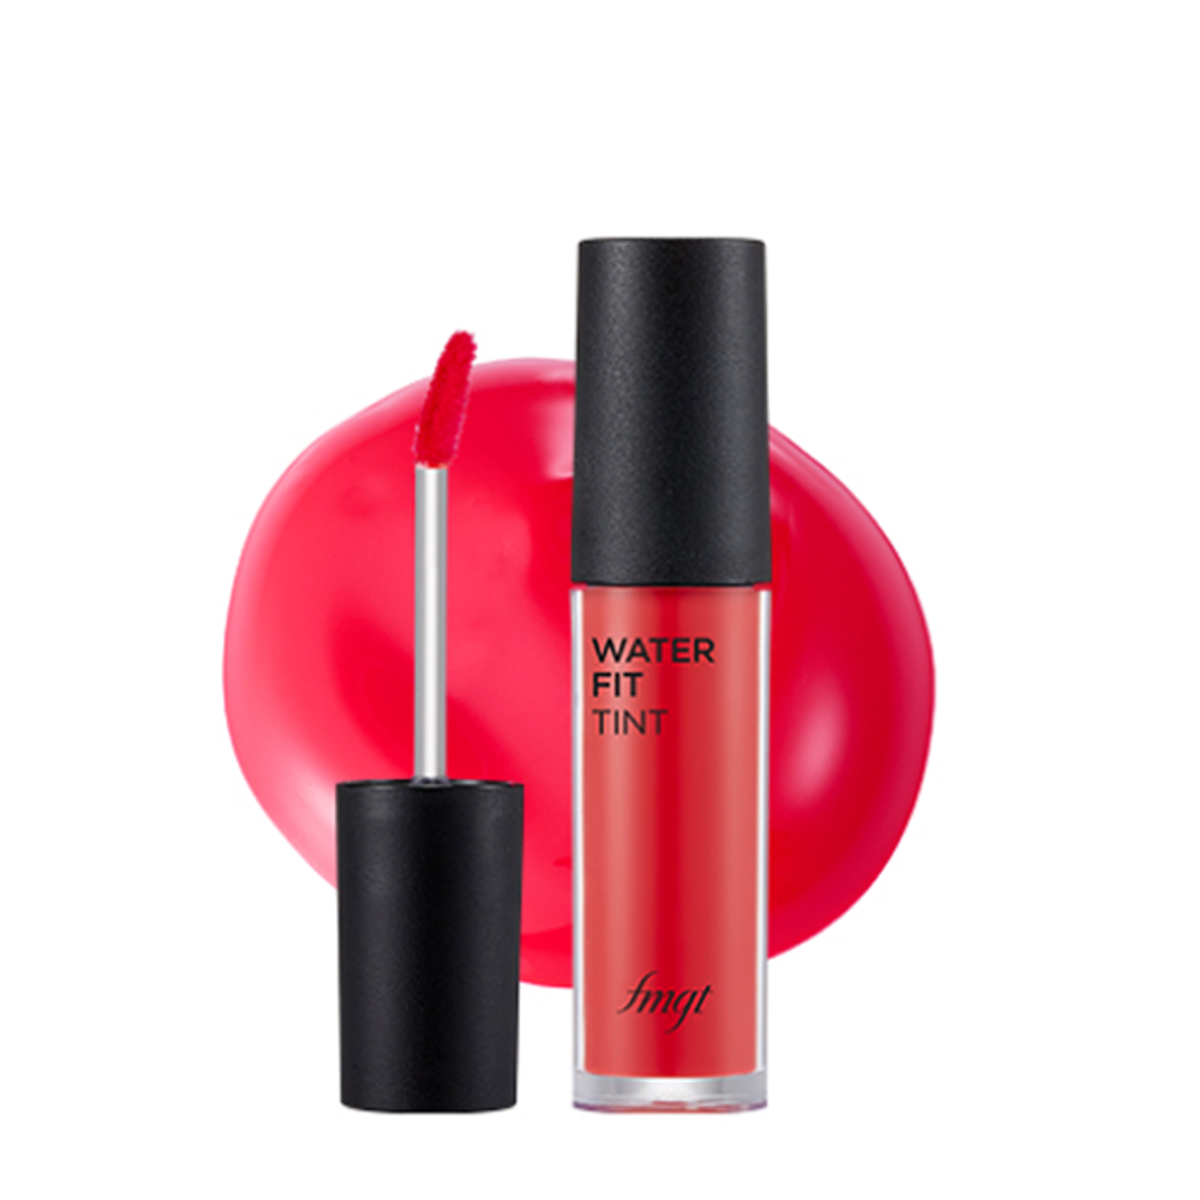 son-tint-thefaceshop-water-fit-lip-tint-5g-3